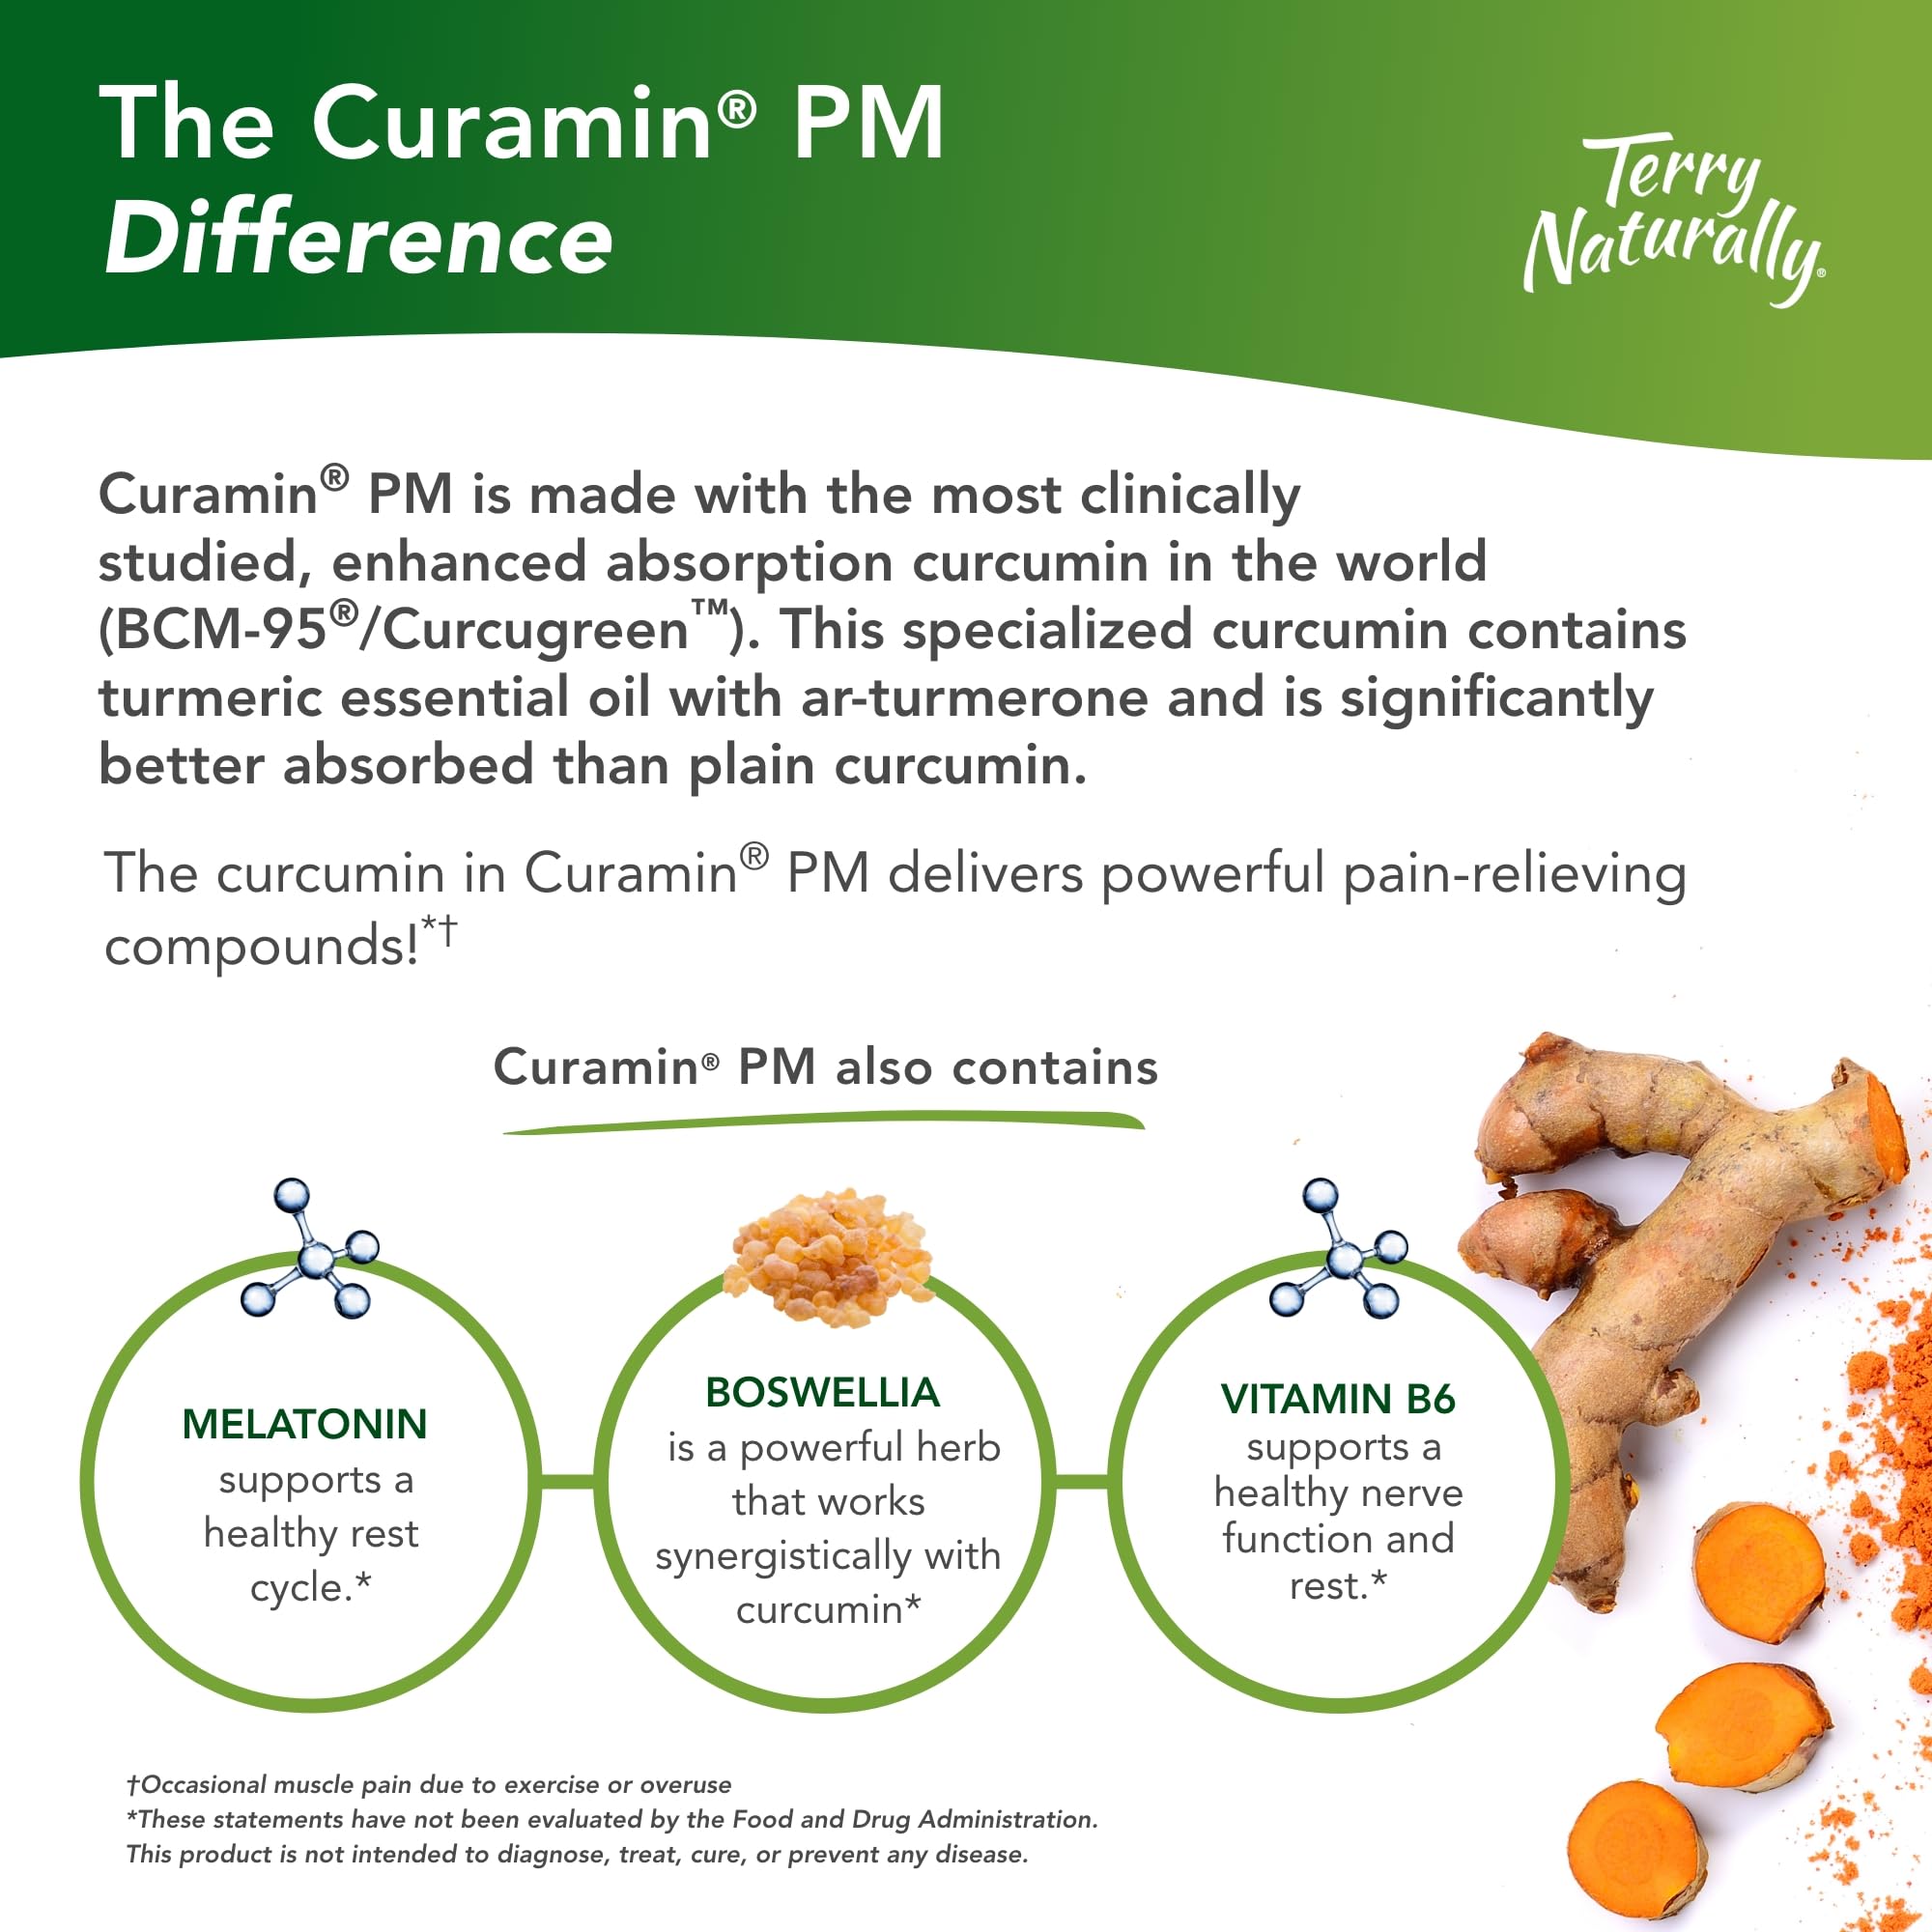 Terry Naturally Curamin PM - 60 Capsules - Non-Habit Forming Nighttime Pain Relief Supplement, Contains Curcumin & Melatonin - Non-GMO, Gluten Free, Kosher - 30 Servings